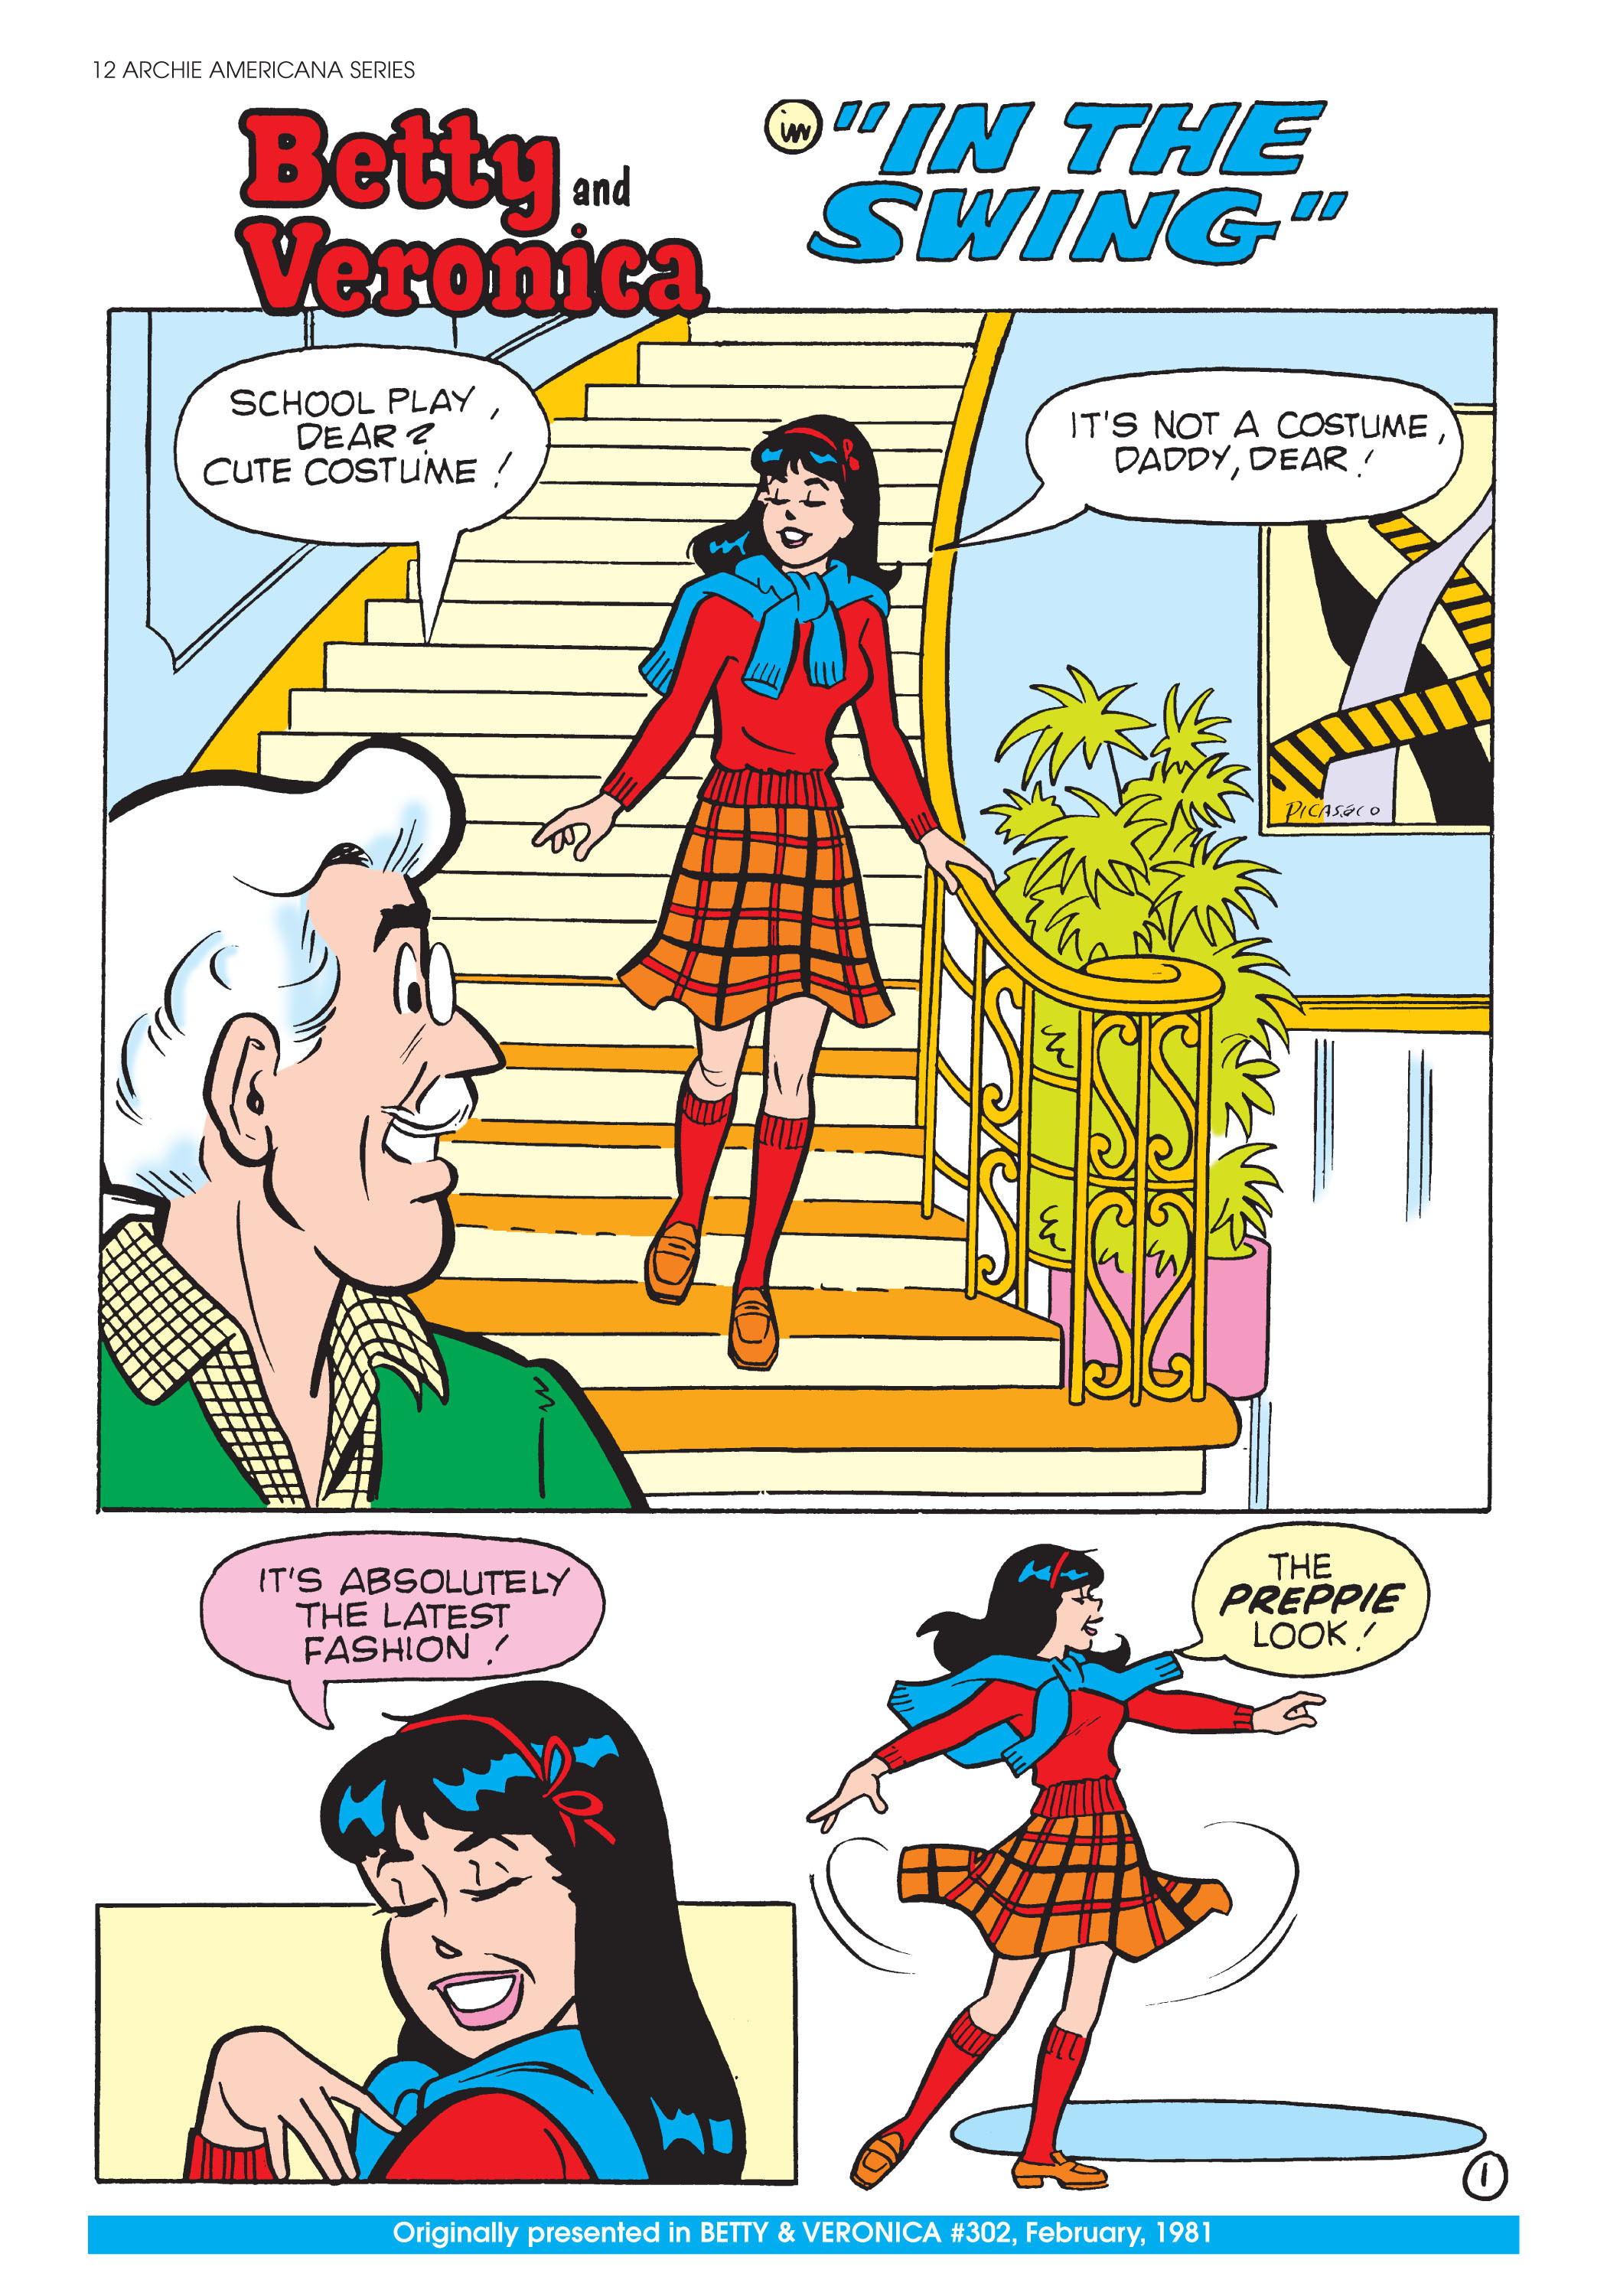 Read online Archie Americana Series comic -  Issue # TPB 5 - 14